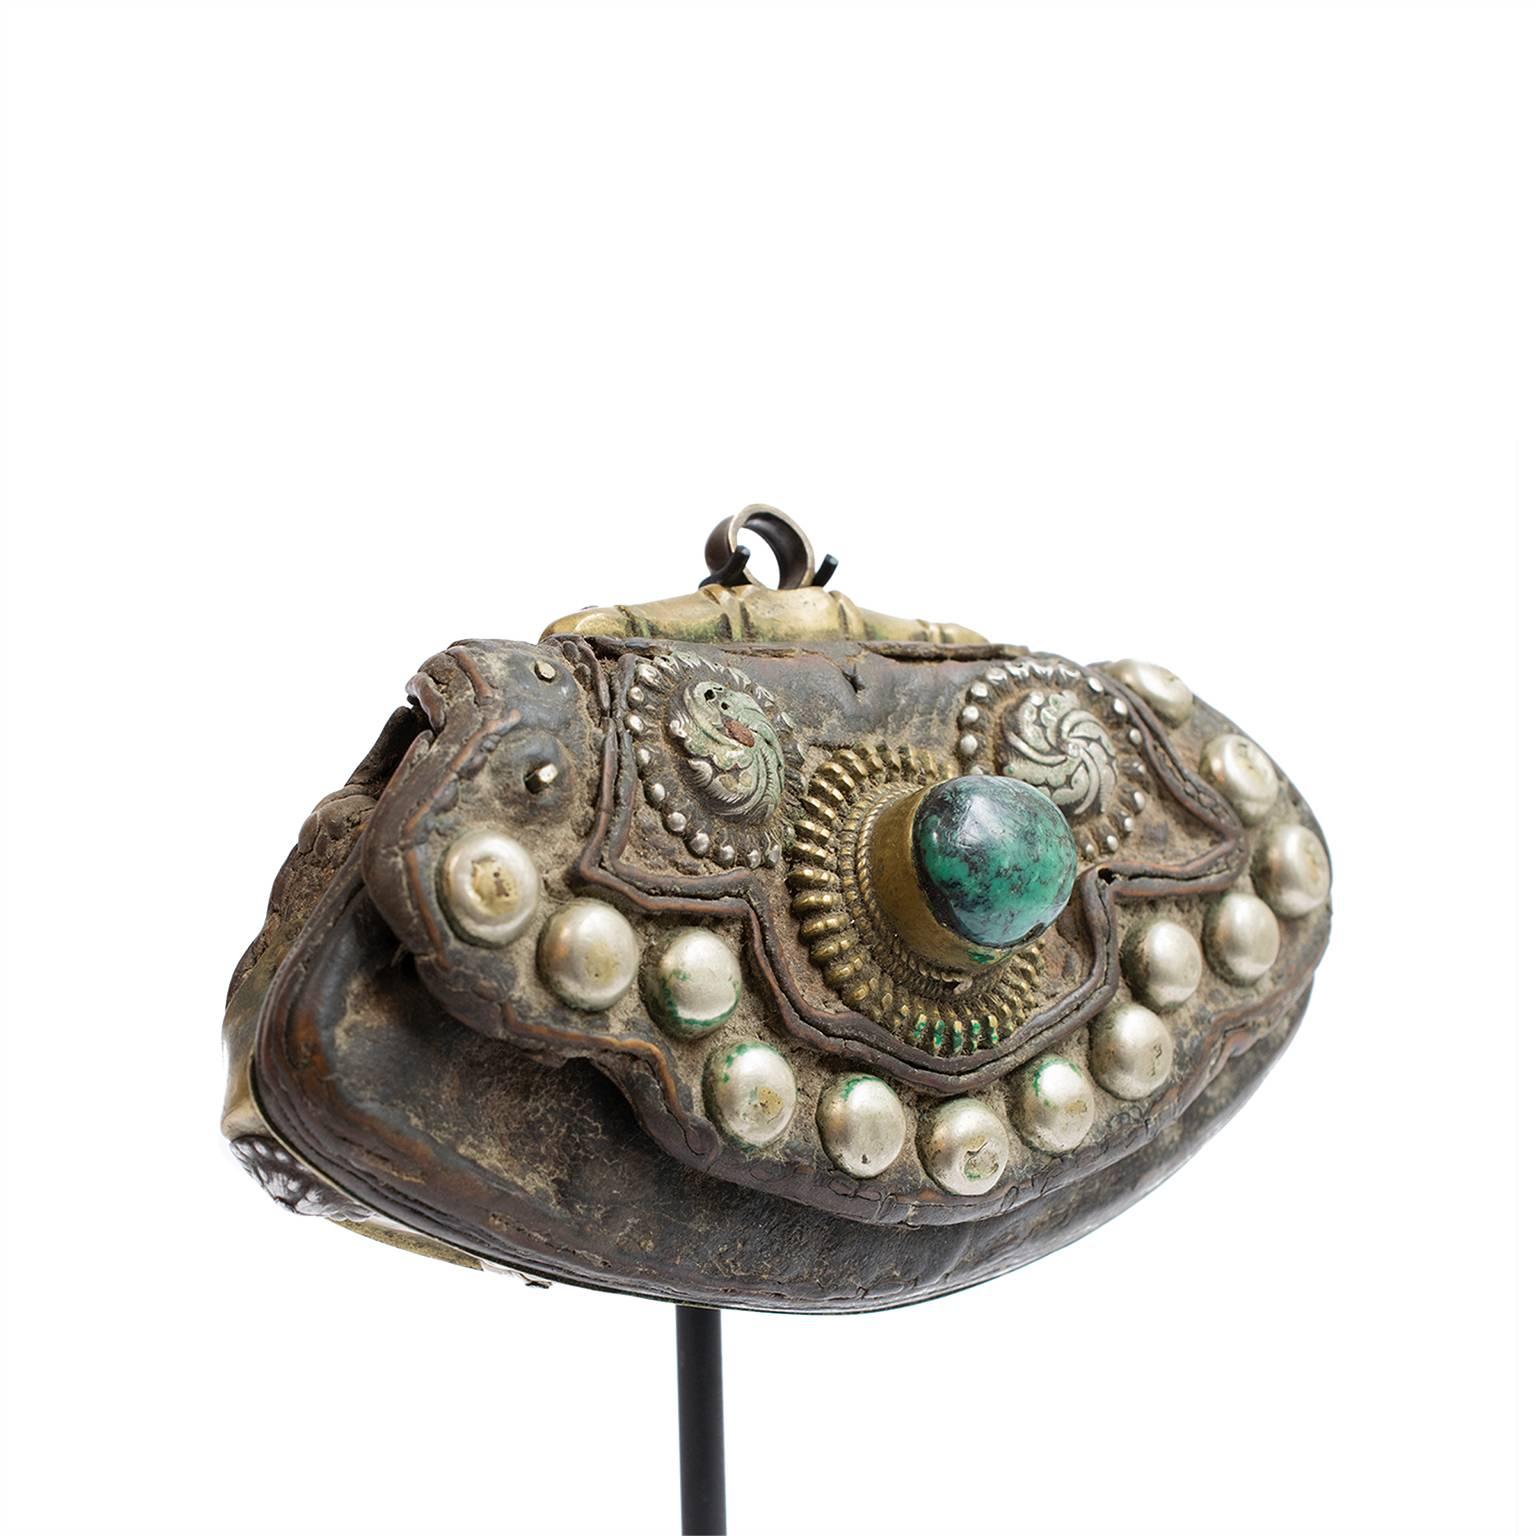 Over a hundred years ago some wealthy man may have used this one-of-a-kind pouch to carry flint. He would have used the stone to start fires while traveling out on the Tibetan plateau. Many flint pouches are utilitarian, but this one is unusually